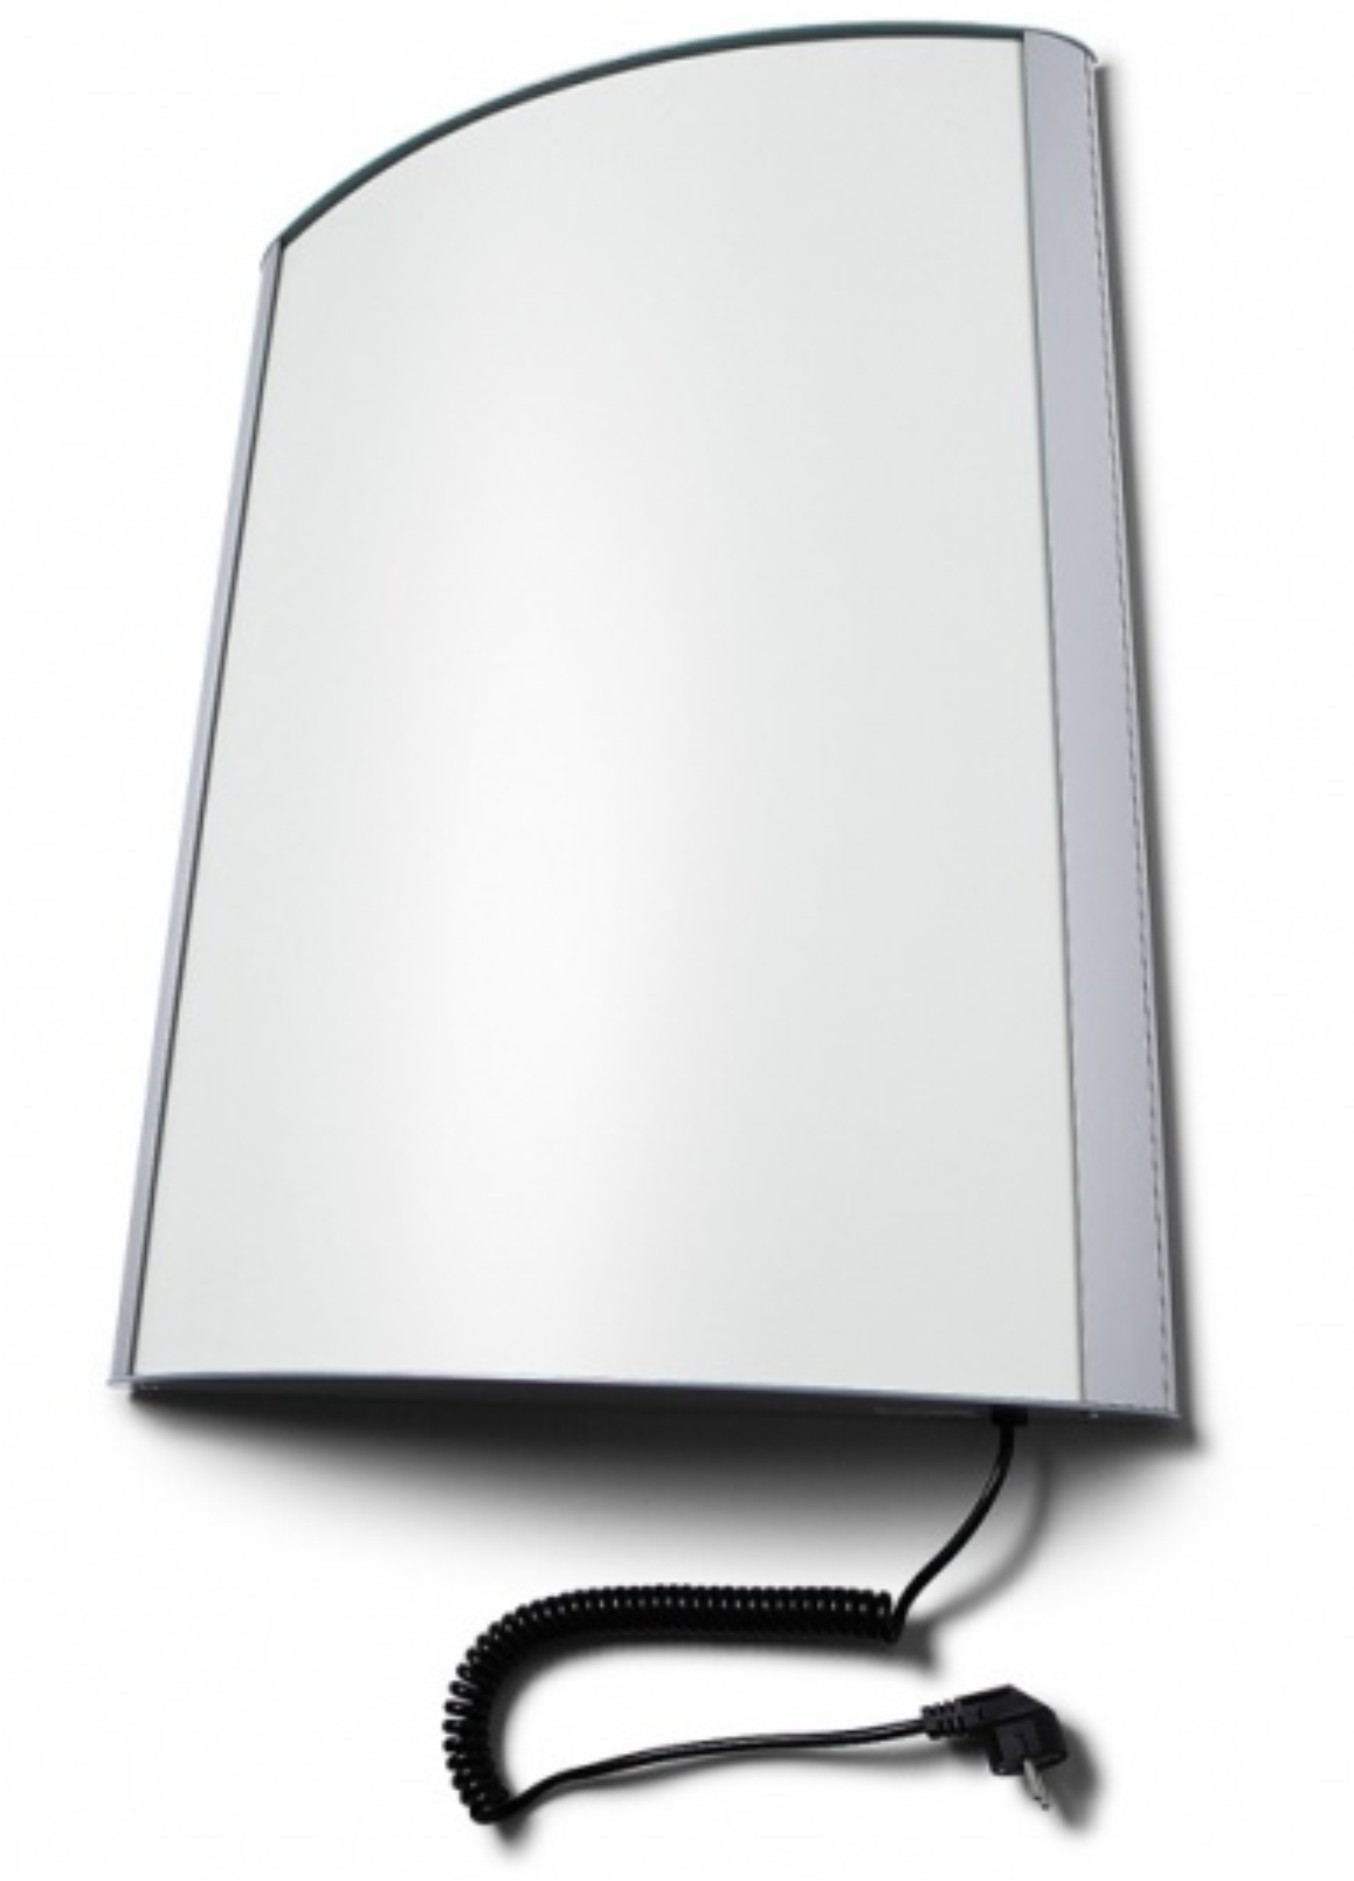 curved front poster light box